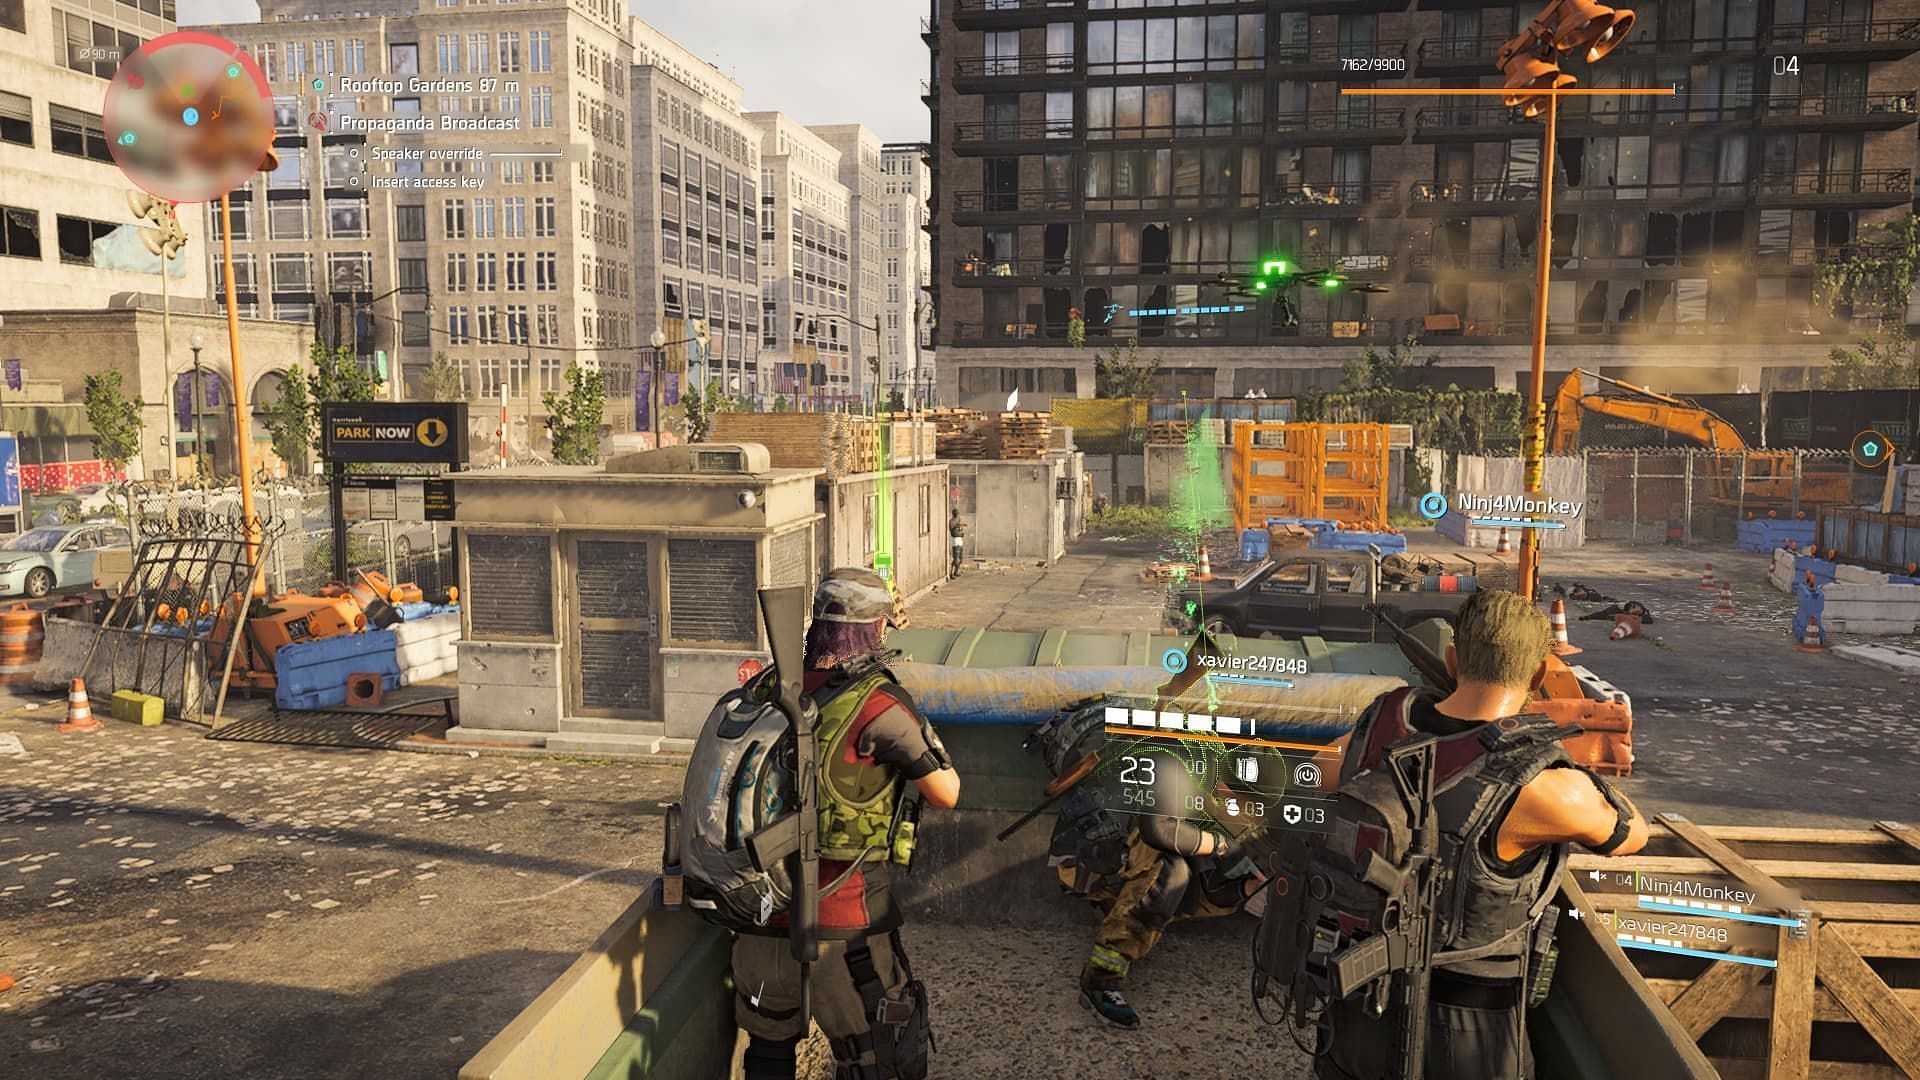 Backpacks are essential items in The Division 2 (Image via Ubisoft)